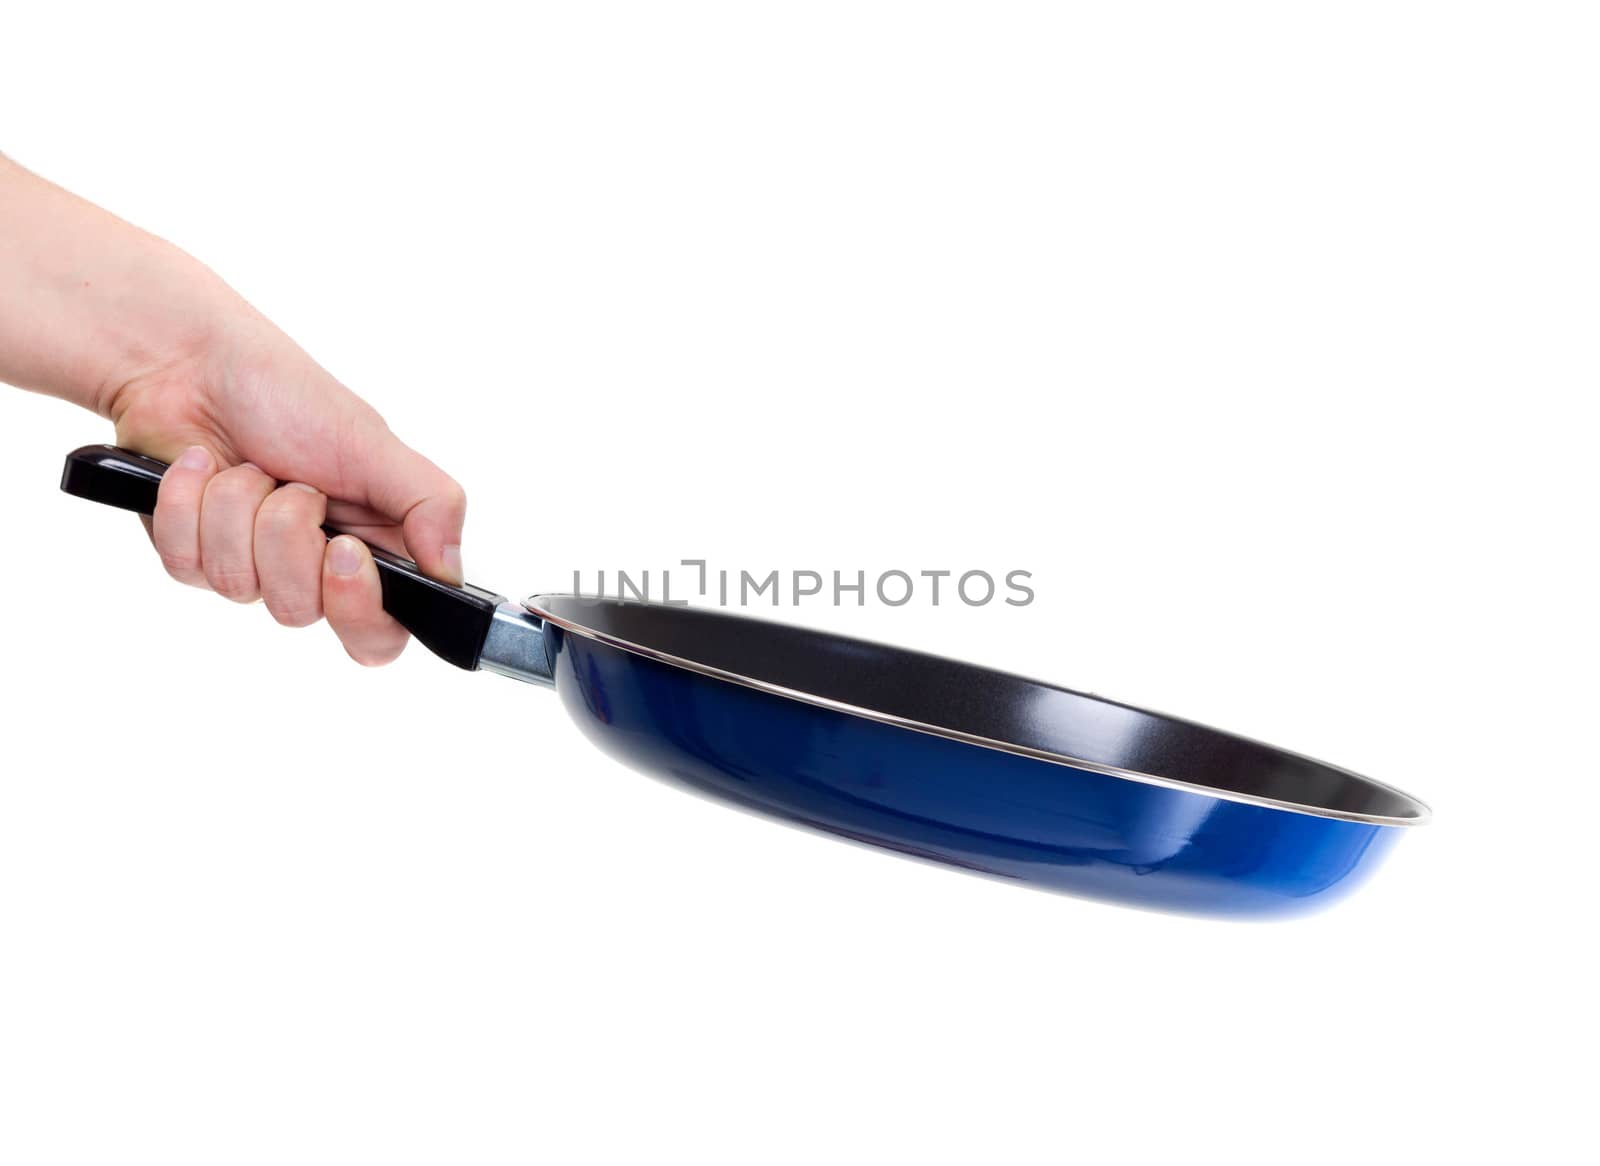 Pan in hand on white background